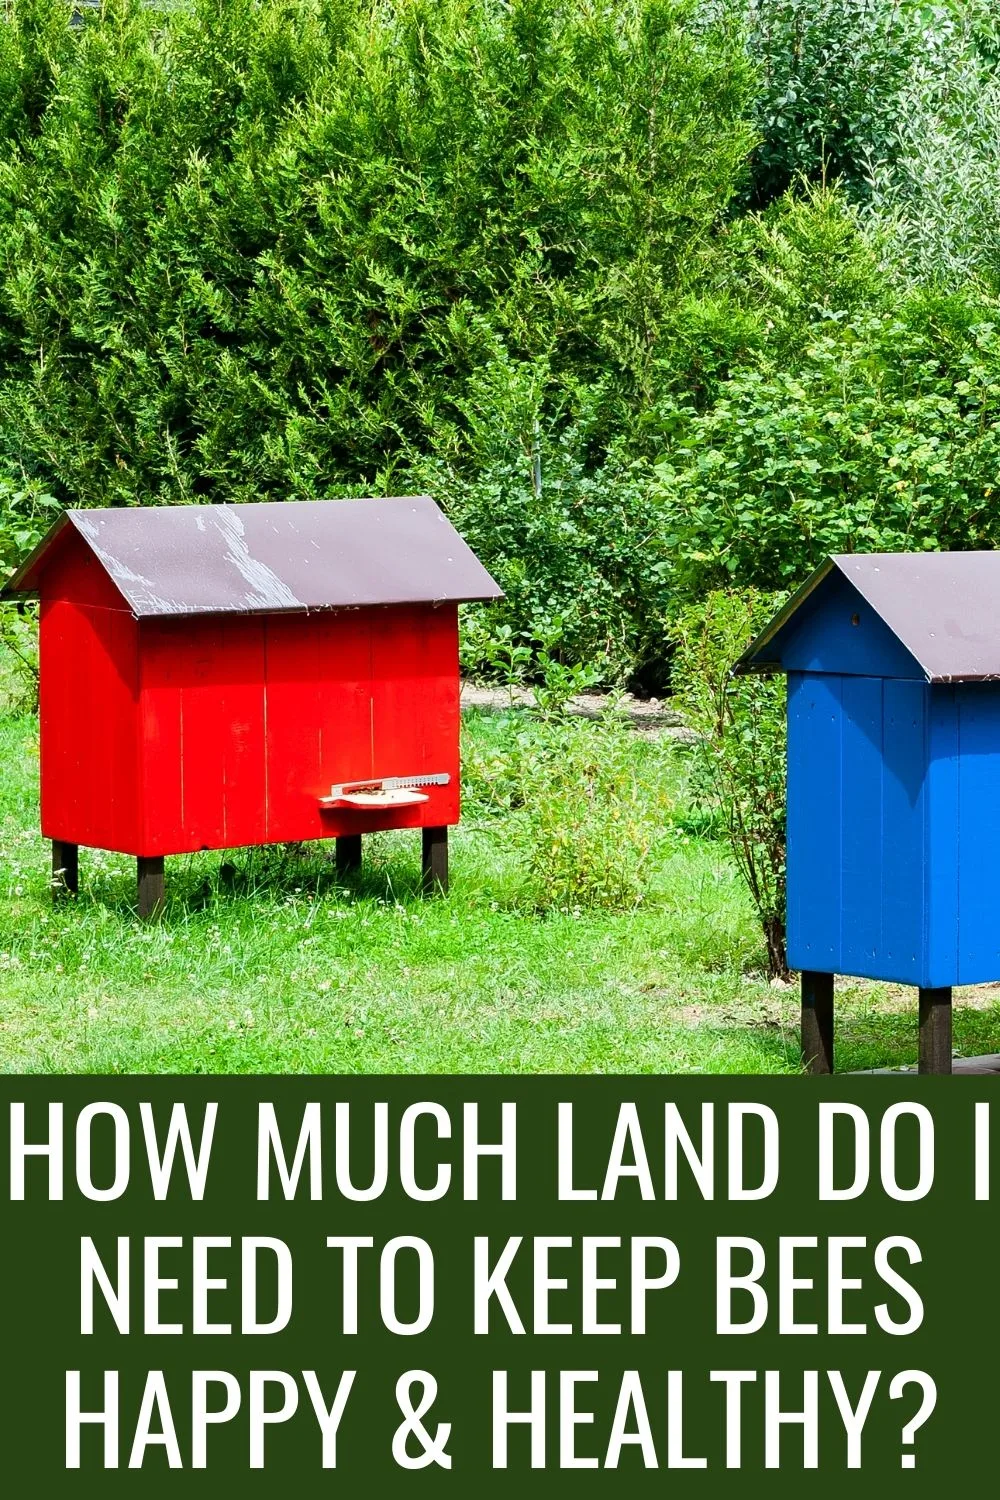 How much land do I need to keep bees happy and healthy?